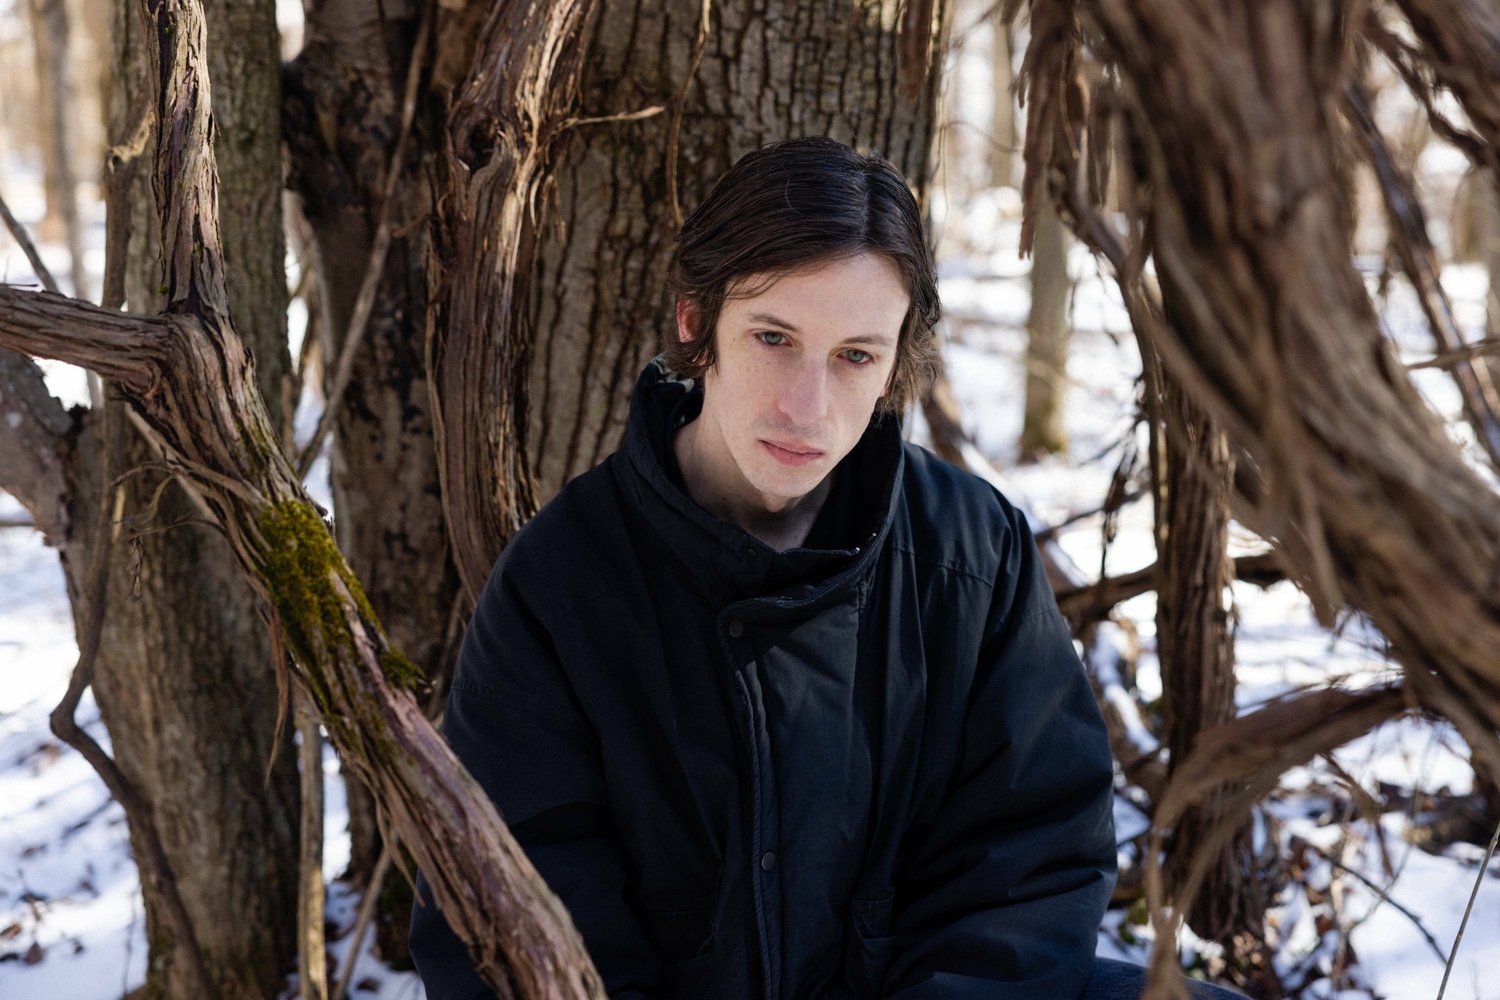 Wicca Phase Springs Eternal returns with new single ‘It’s Getting Dark’